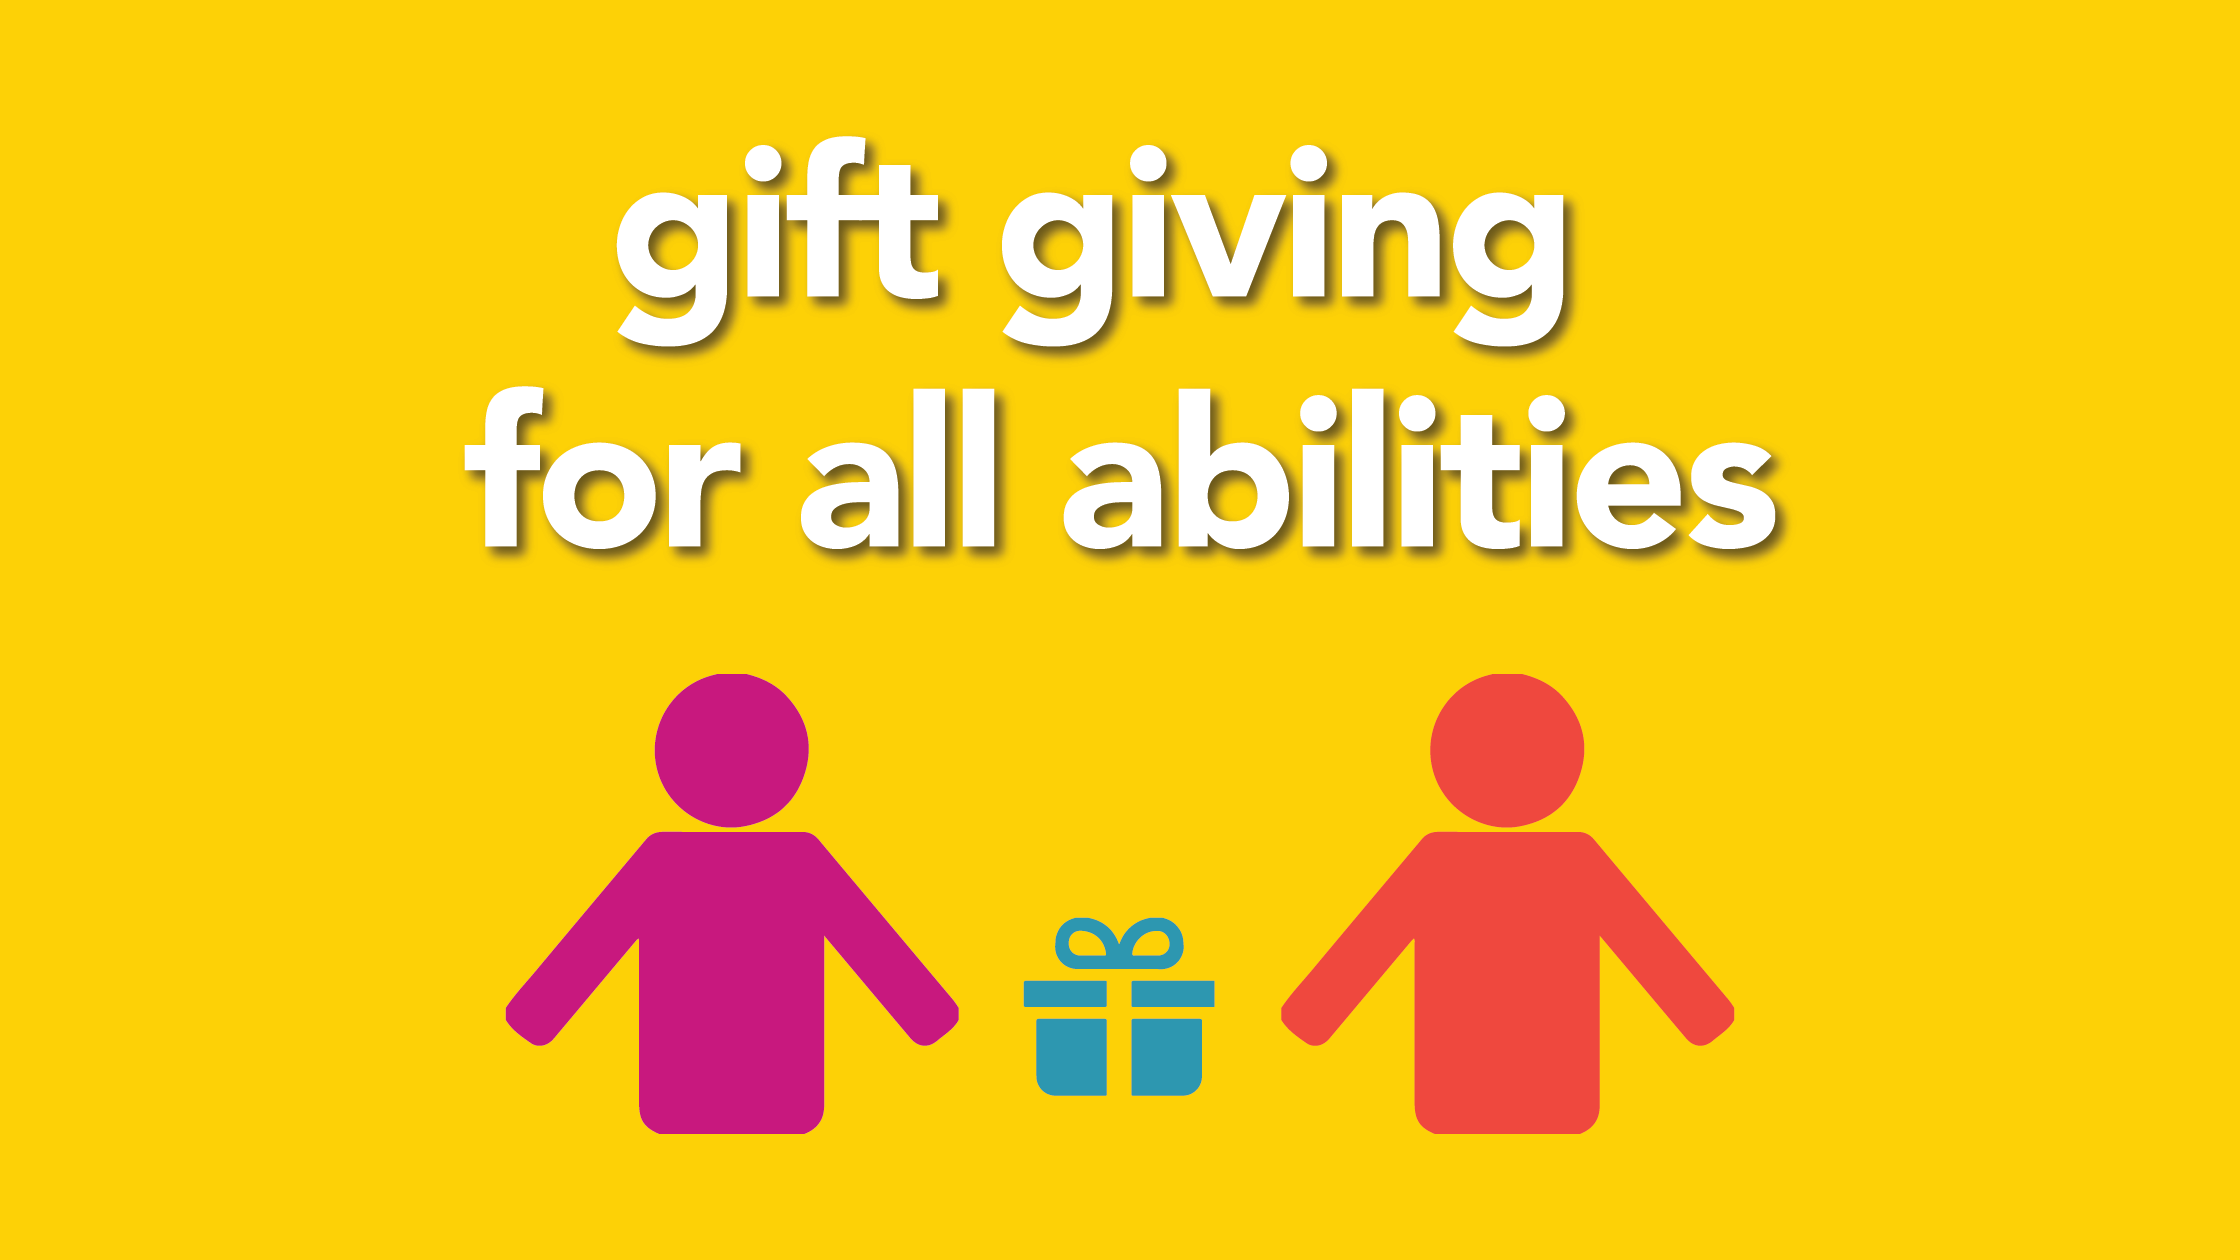 graphic with text "gift giving for all abilities" and image of 2 stick figures and present